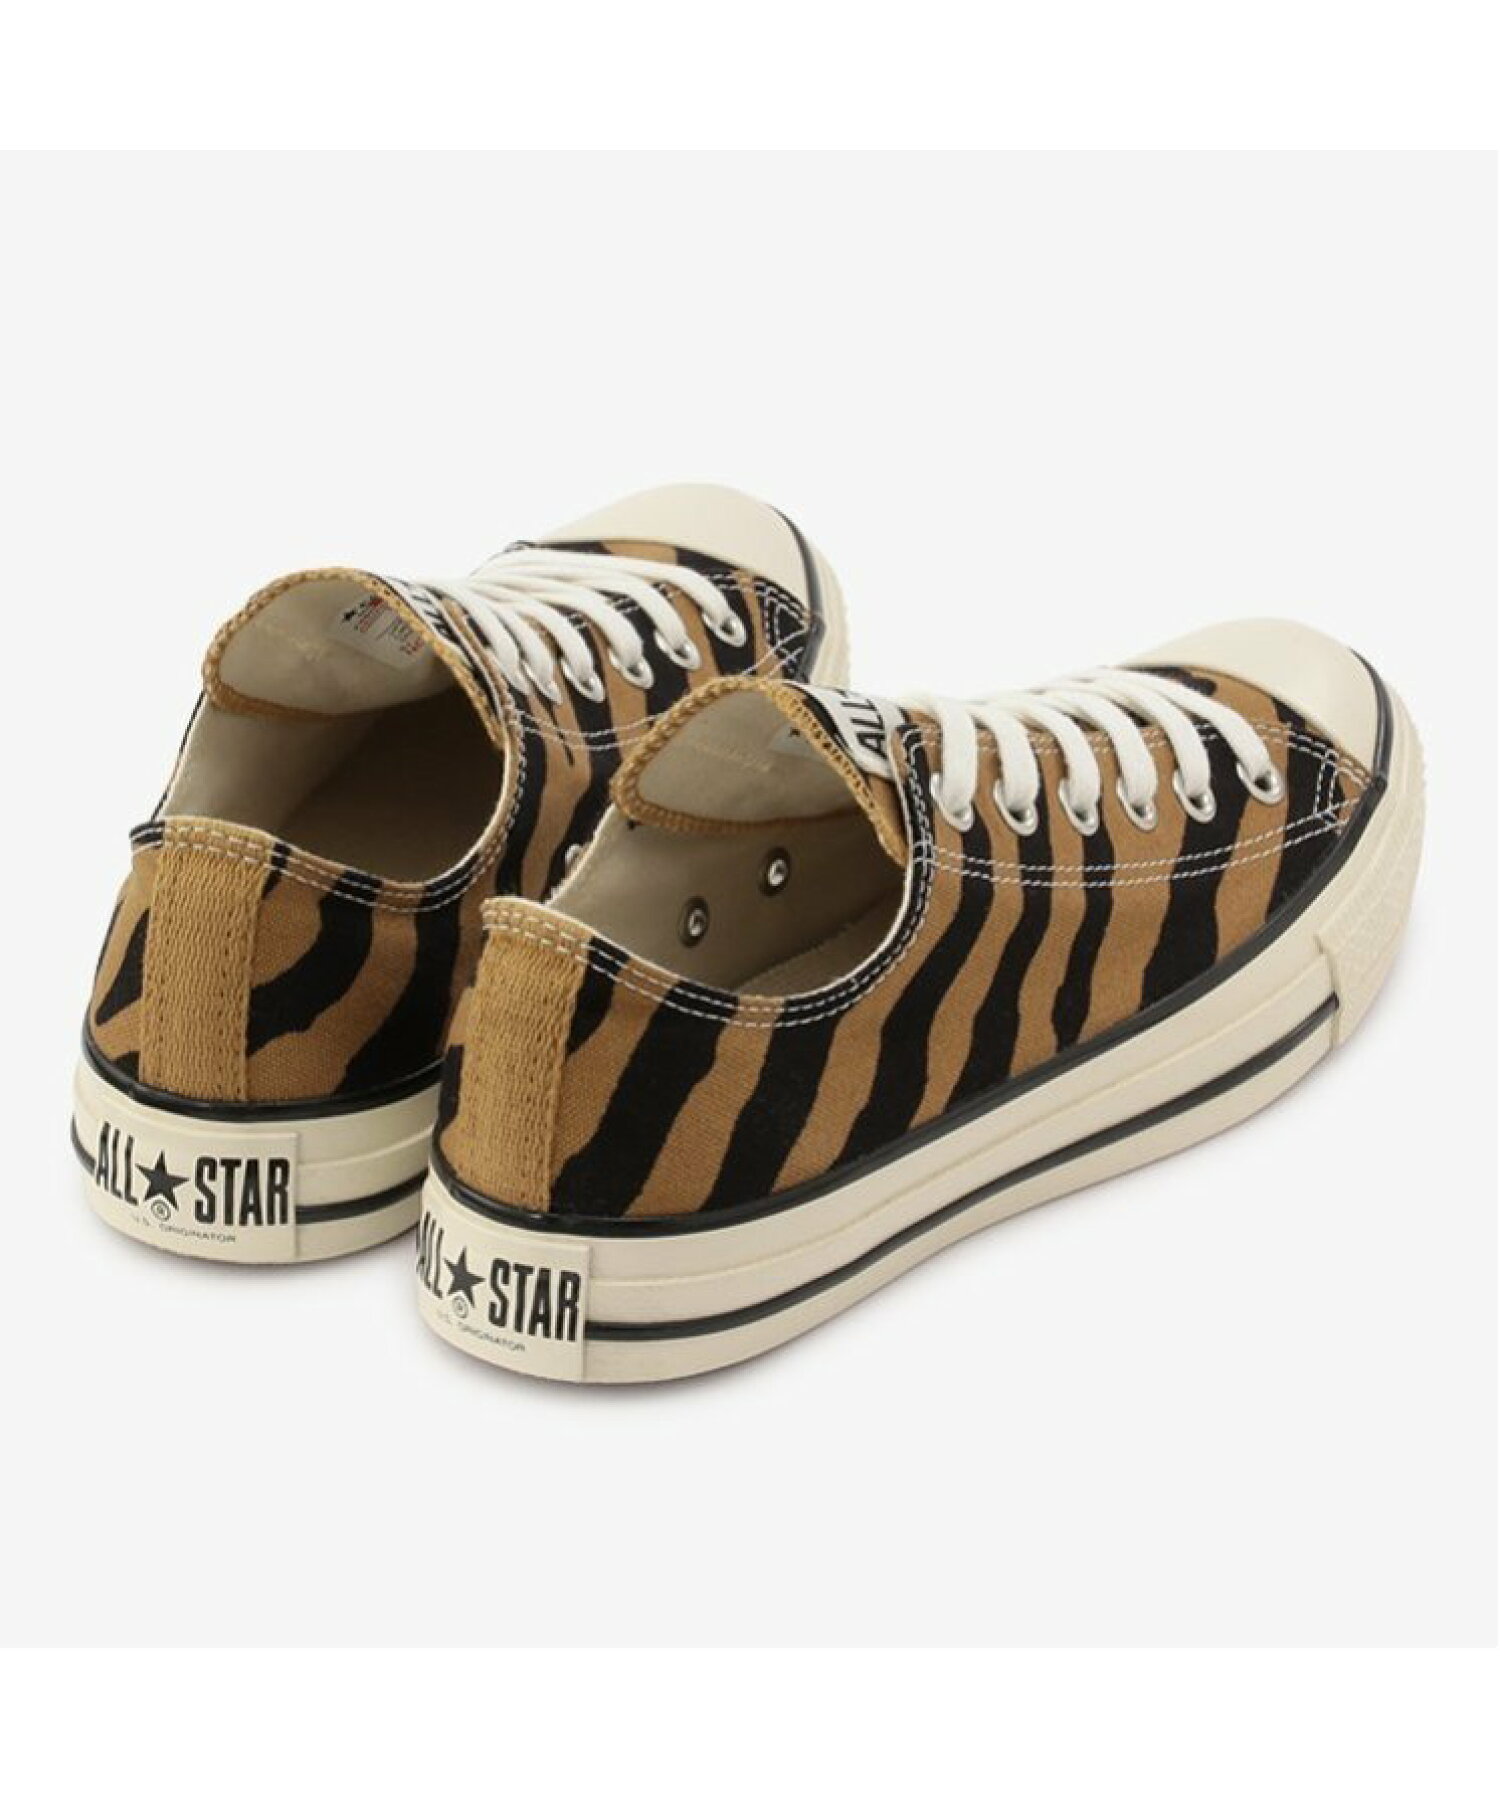 ALL STAR US BROWNTIGER OX